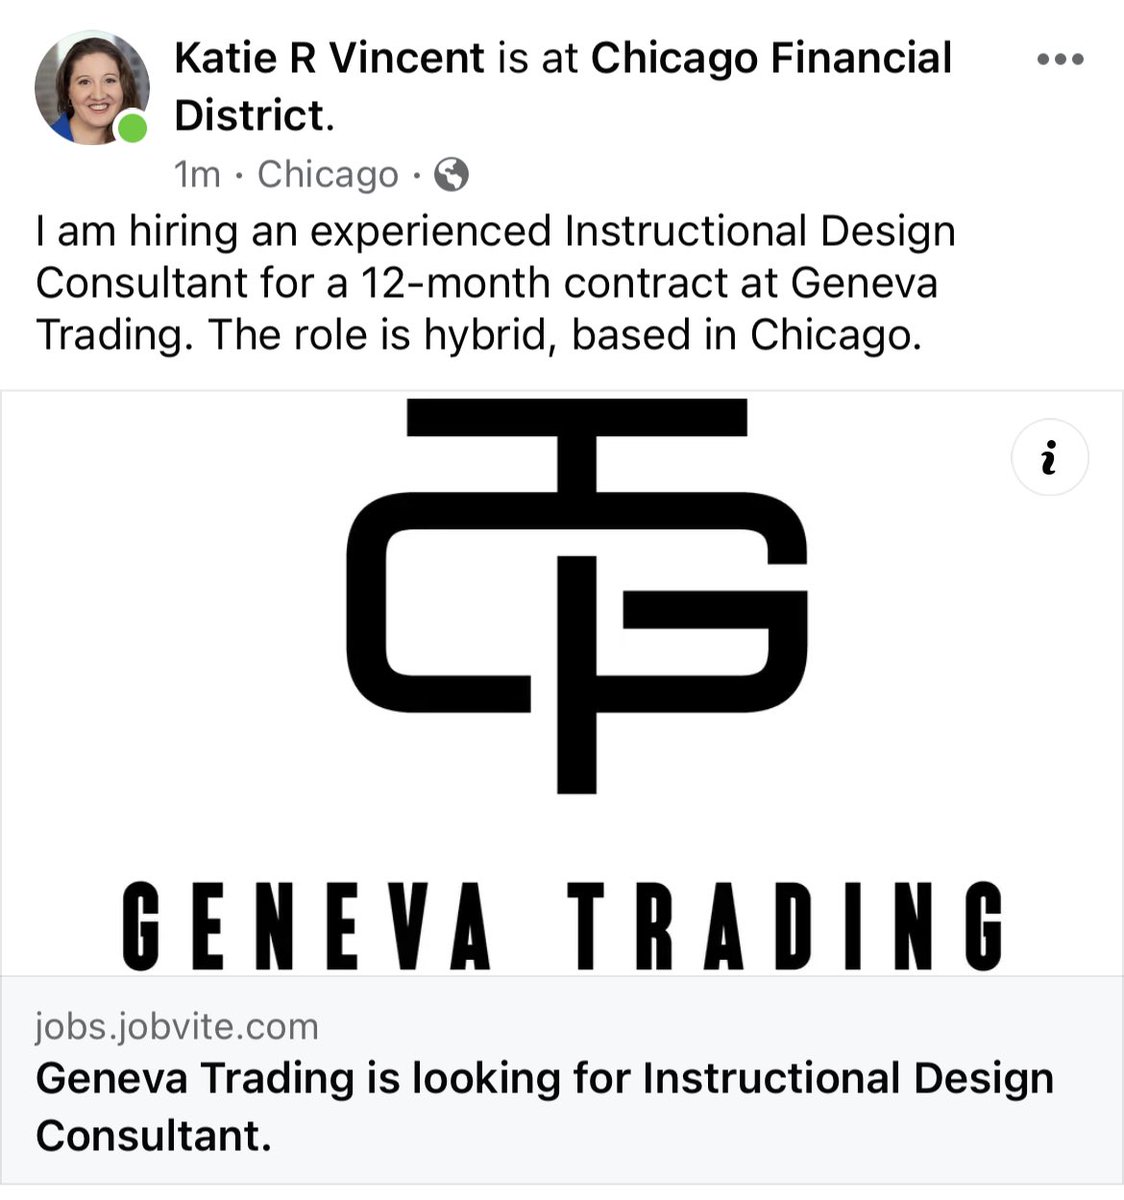 I’m #hiring an Instructional Designer for a 12-month contract at @GenevaTrading ! Work with me on an awesome #HR team at a great place to work! #trading #fintech #chicagojob #hybridjob #instructionaldesigner #instructionaldesignjob #instructionaldesign #genevatrading